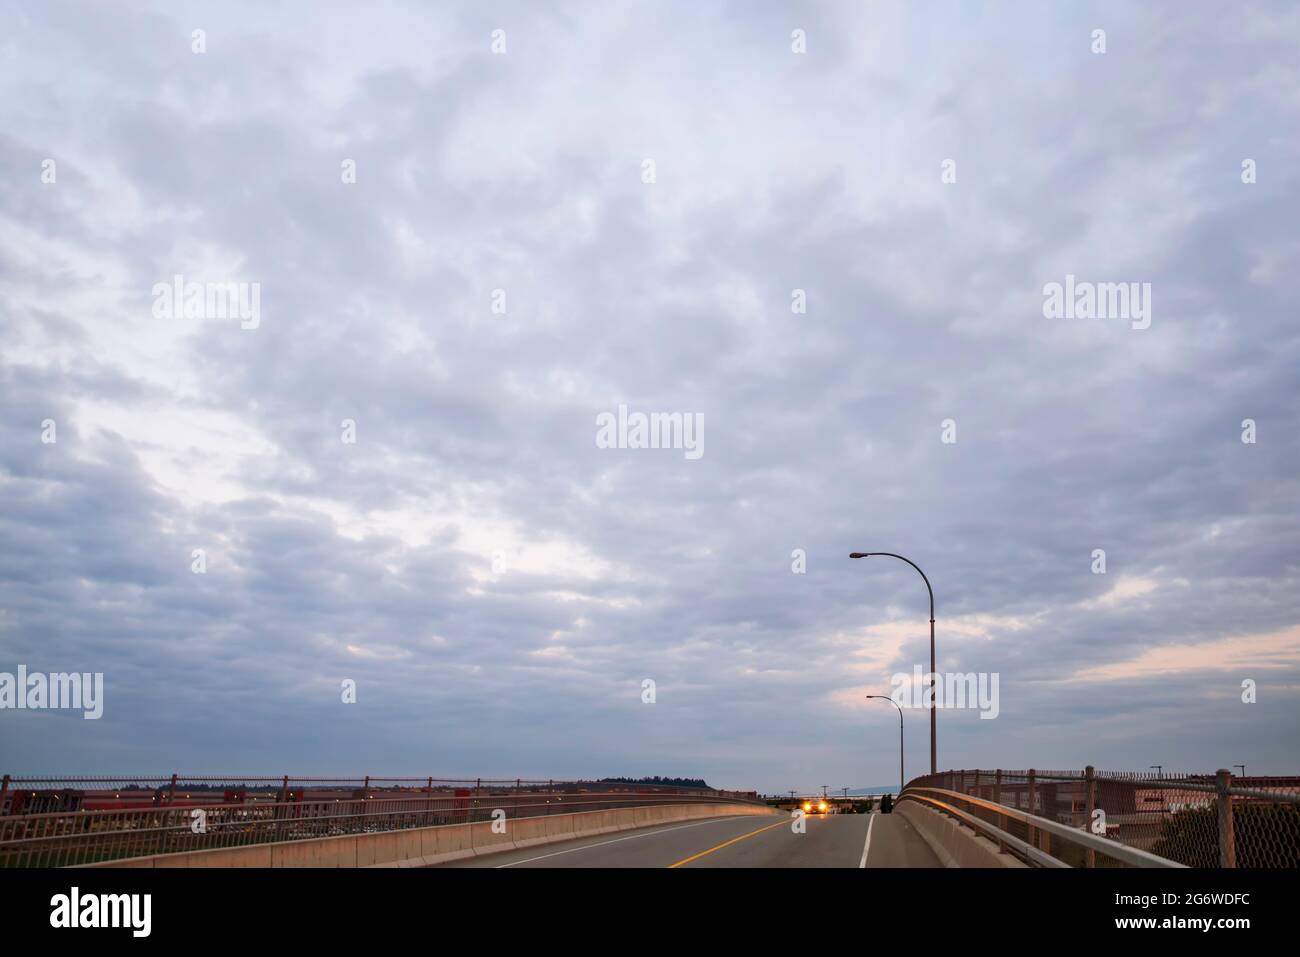 blue-pink evening clouds over the car viaduct, the glowing headlights of the car moving forward along the bridge. Stock Photo